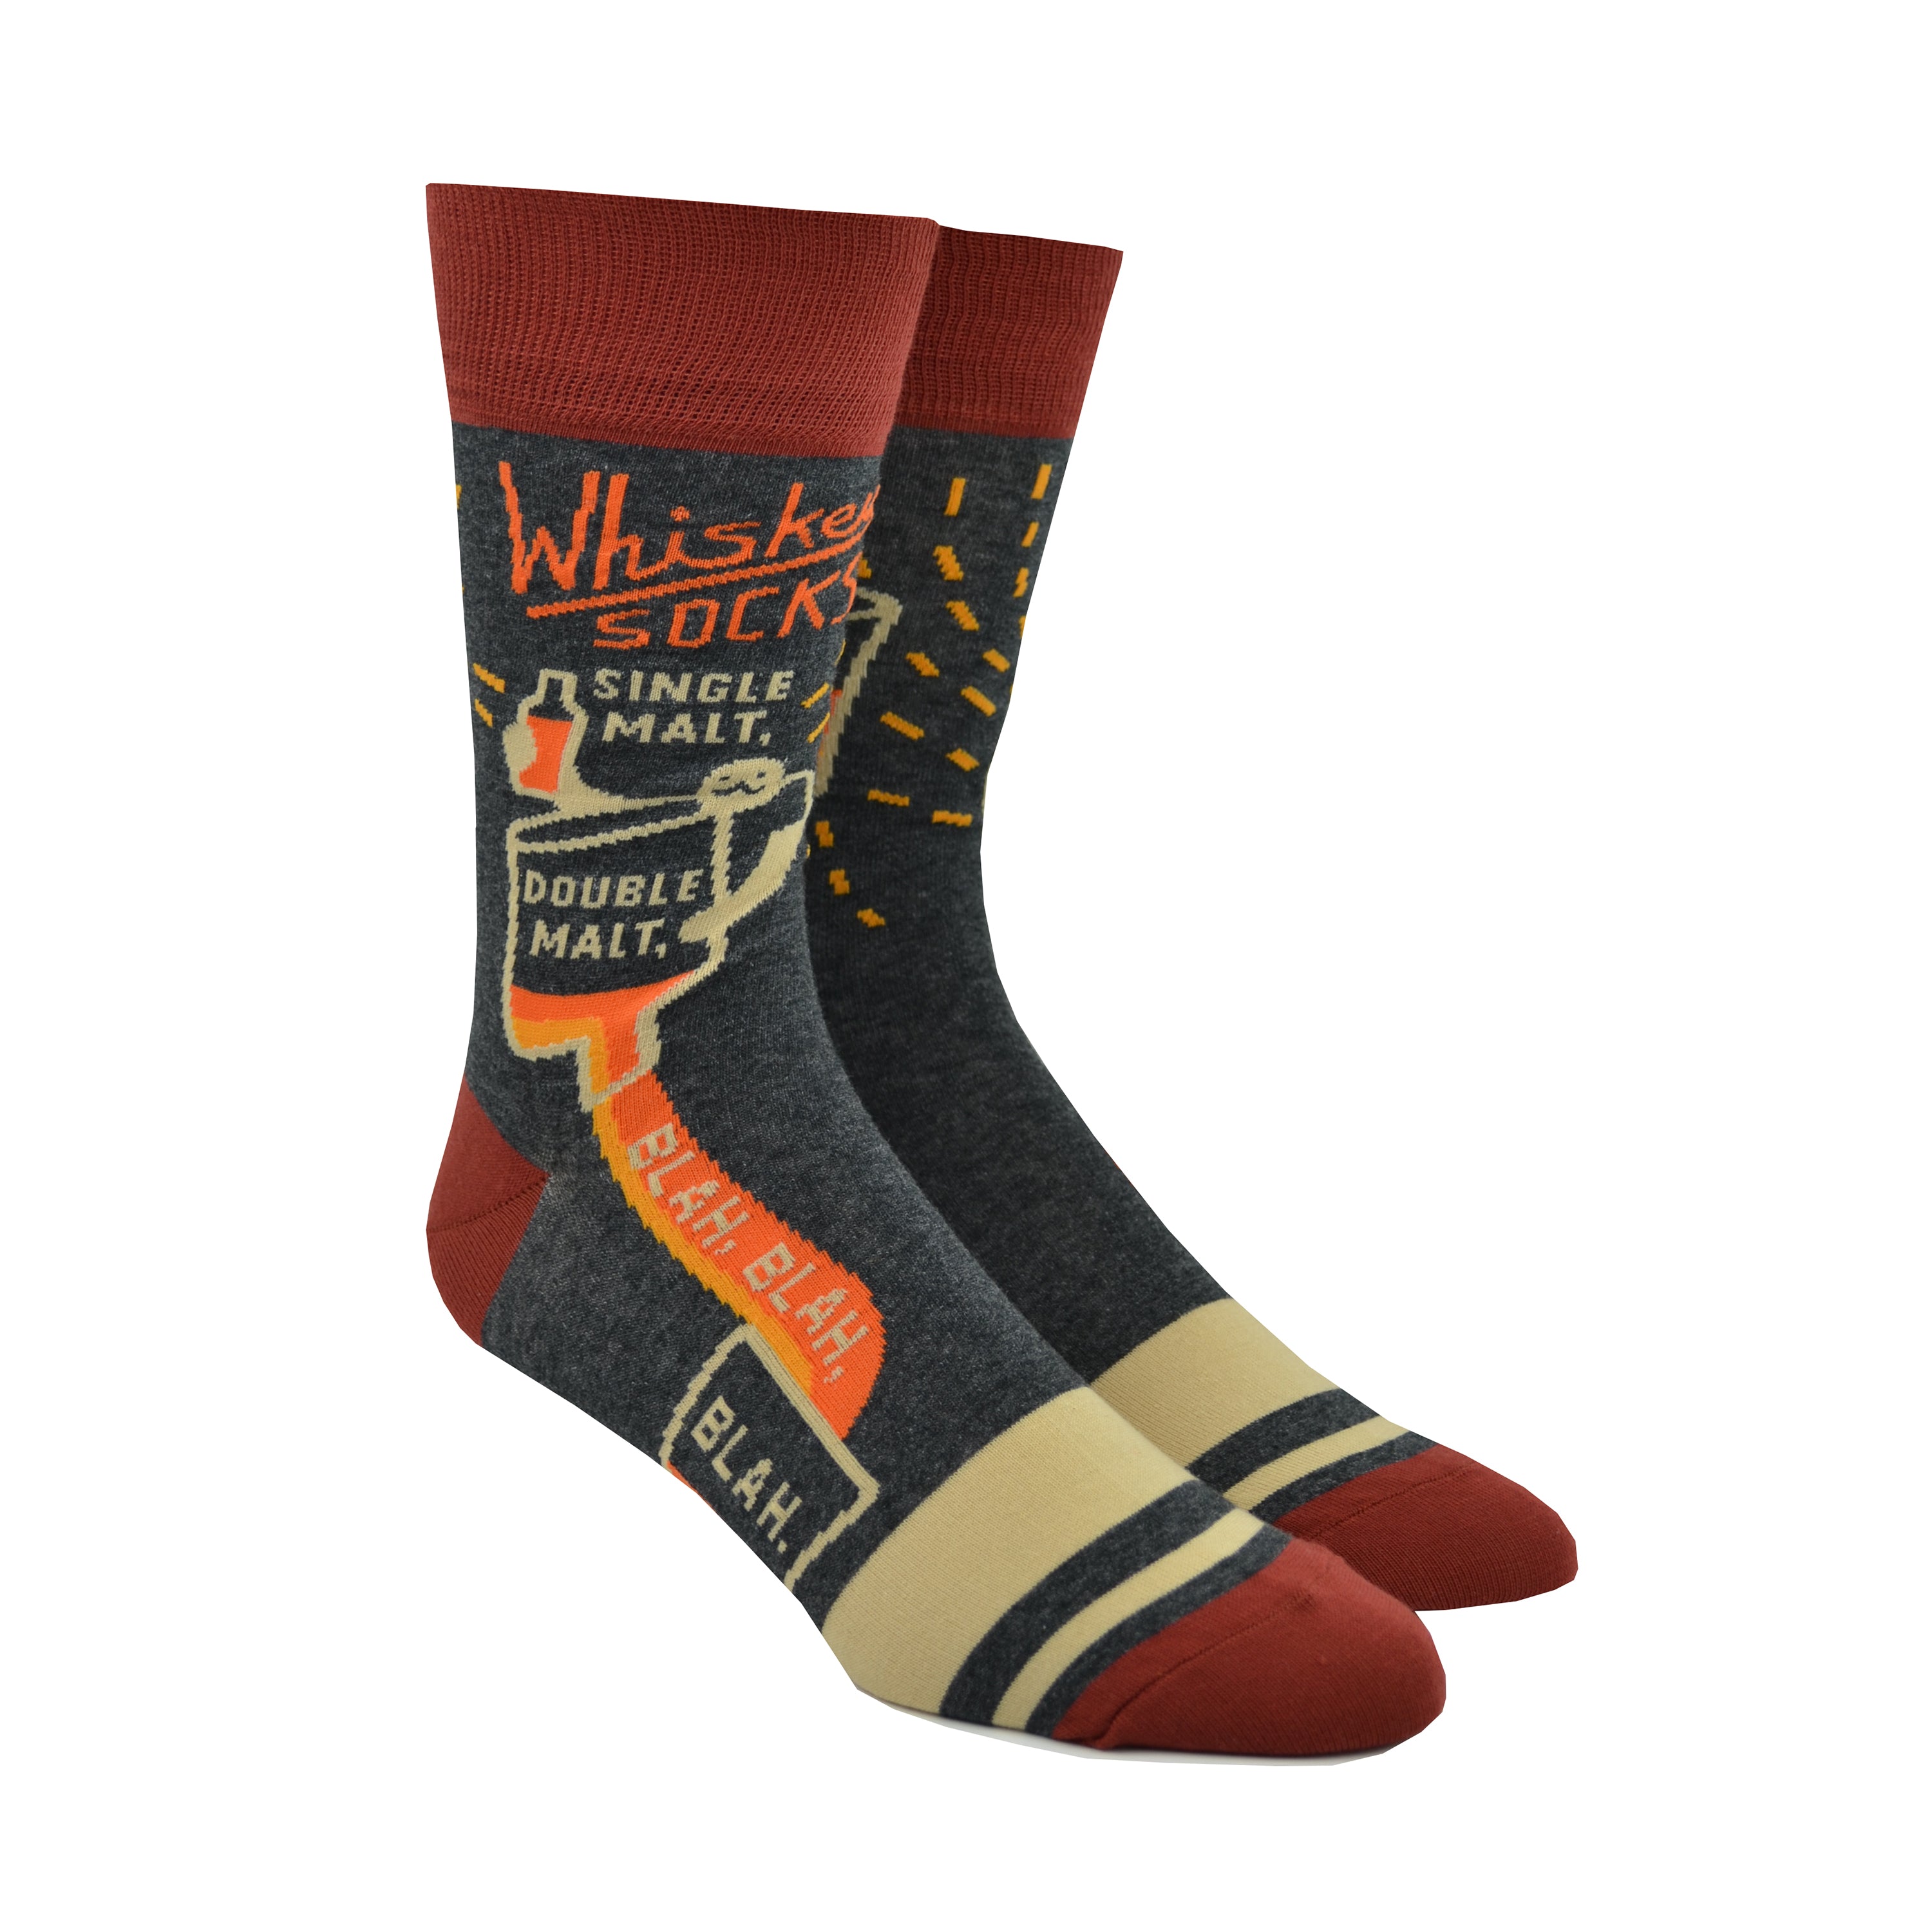 Shown on leg forms, a pair of Blue Q brand men's cotton crew socks in grey with 2 tan stripes on the foot and brick red cuff/heel/toe. These socks feature a mustachioed man pouring a whiskey that flows down the foot of the sock. The words, 